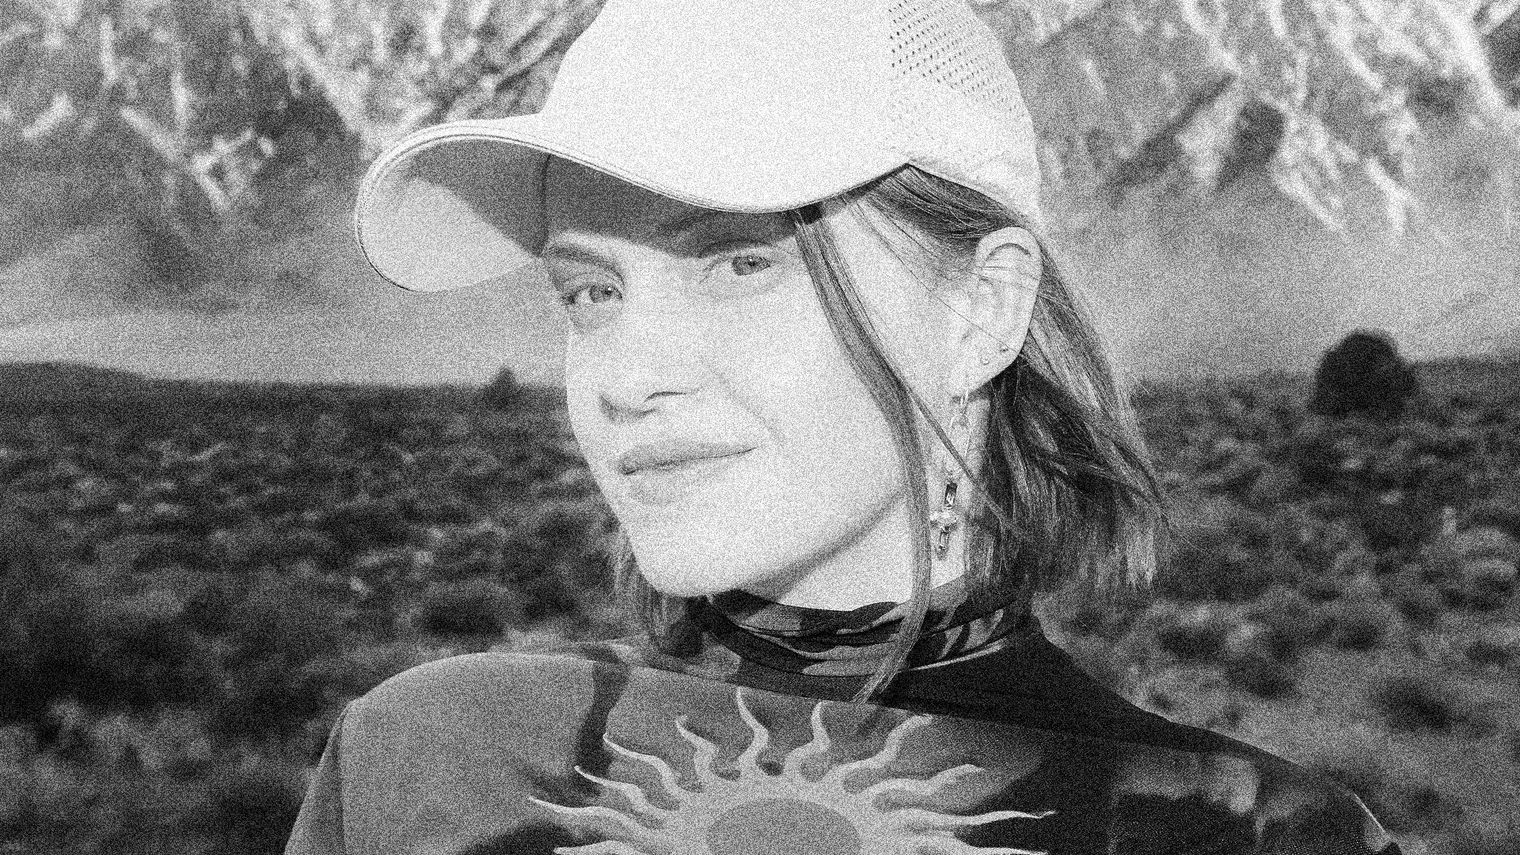 Greyscale portrait of Kučka wearing a cap and ornate earrings, in the background grass plains and distant mountains can be seen.